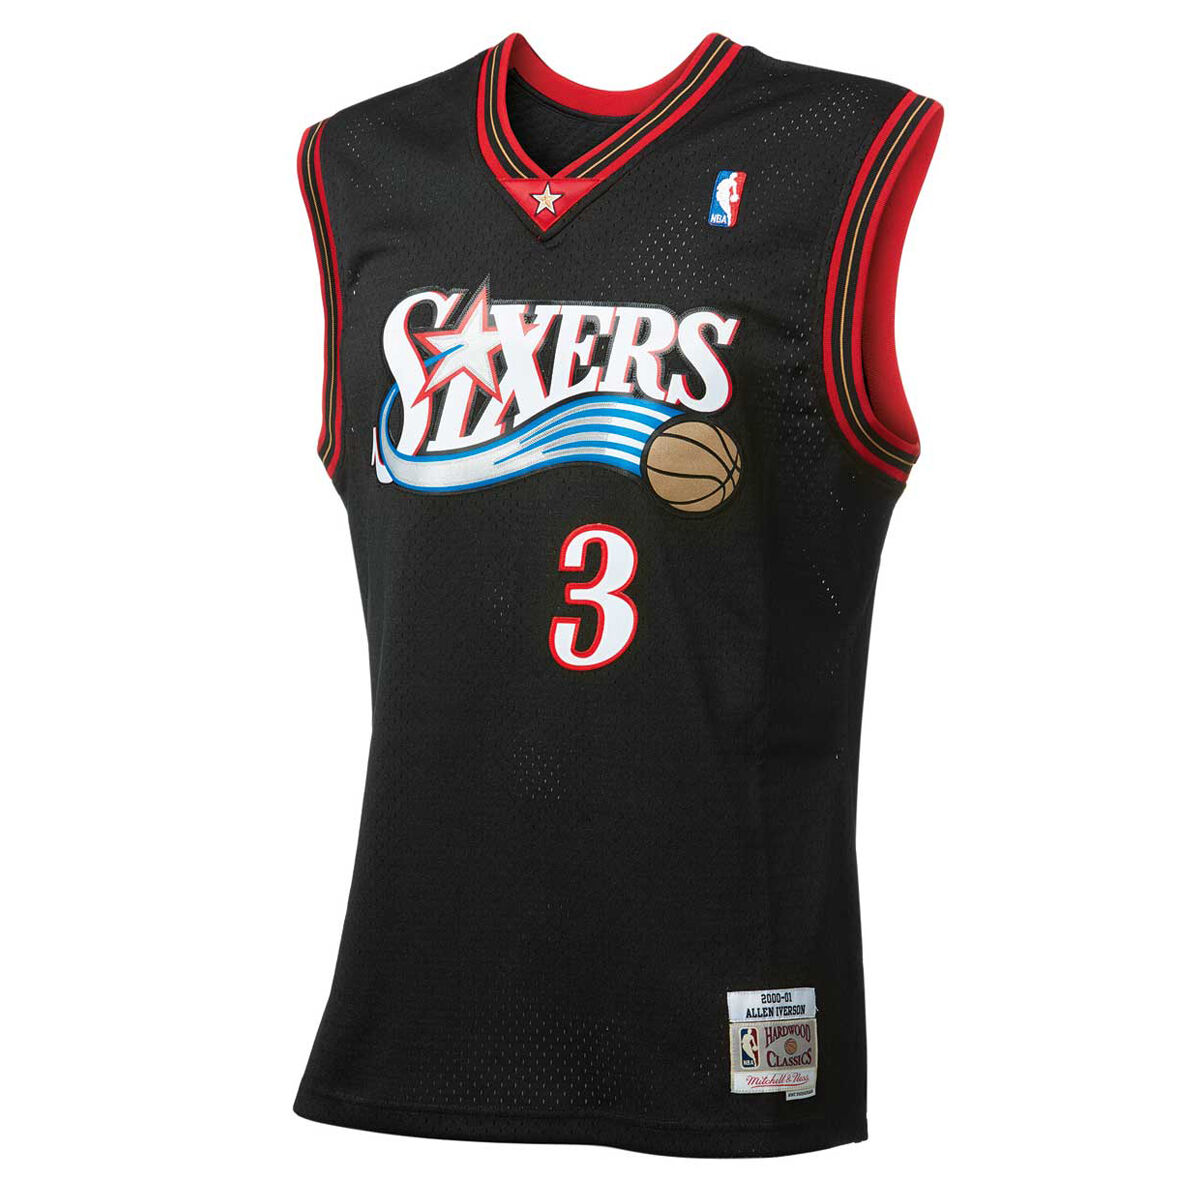 iverson jersey